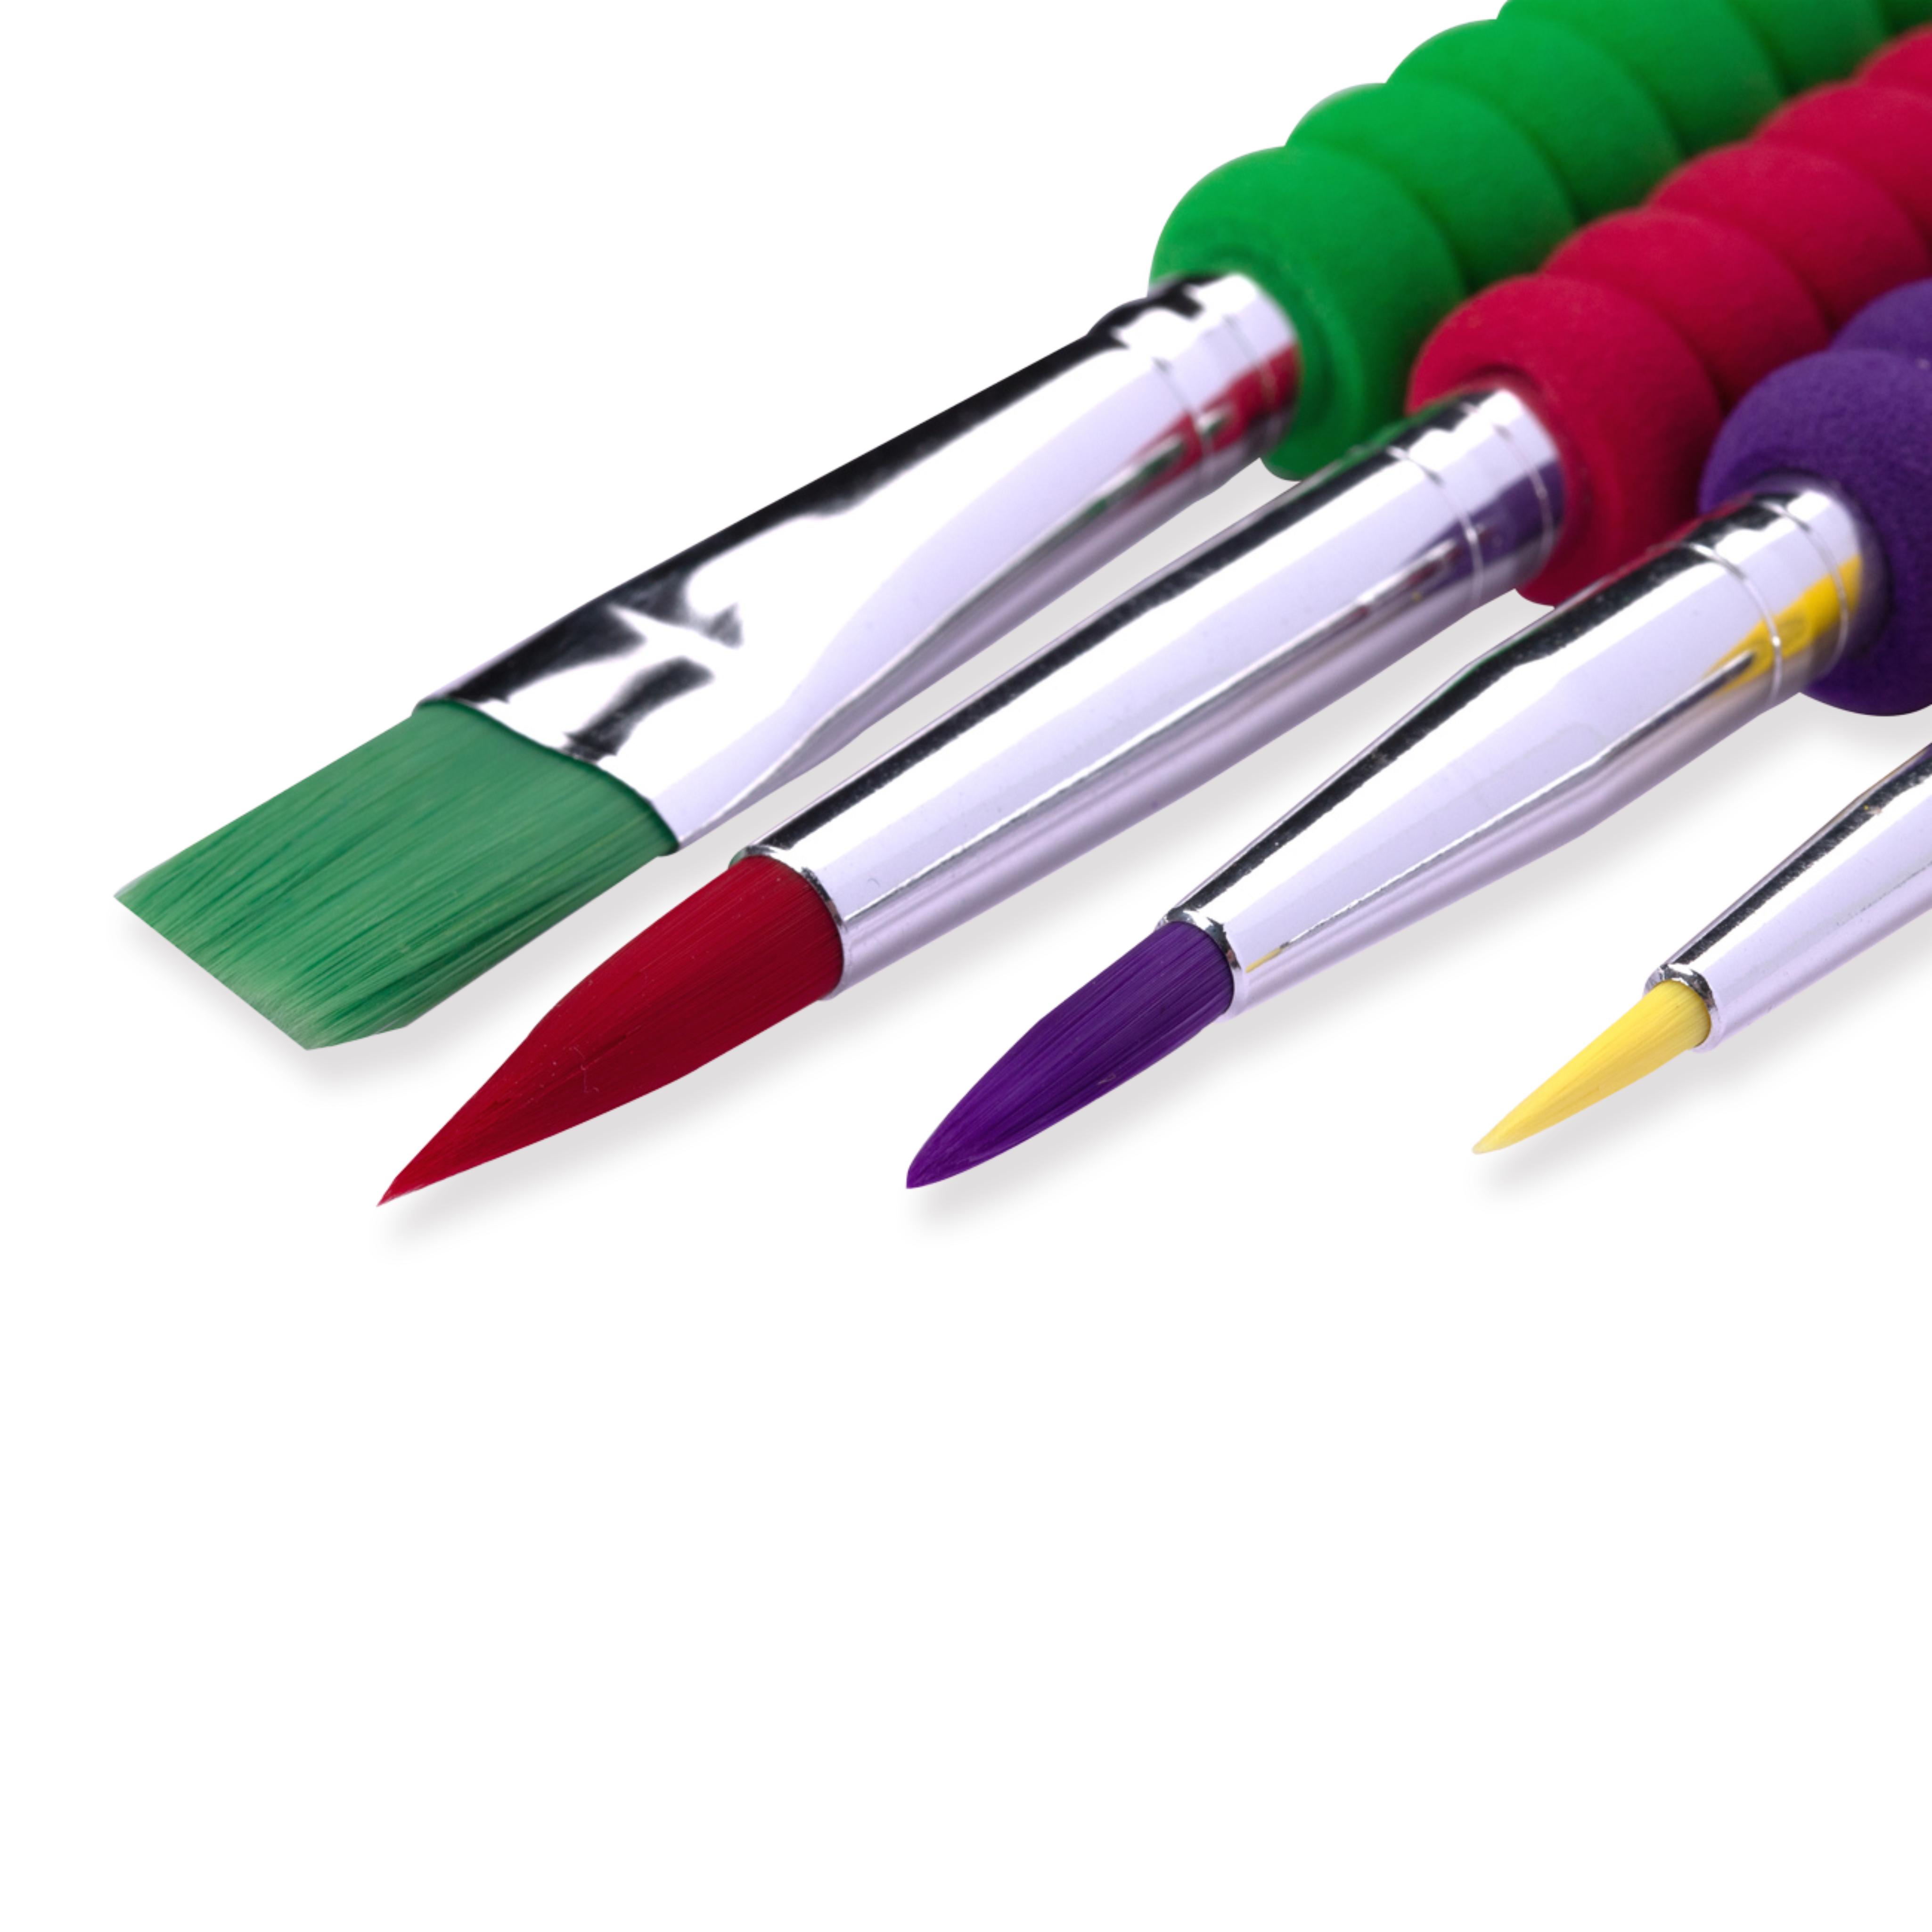 Faber-Castell Soft-Touch-Pinsel, 4er-Pack